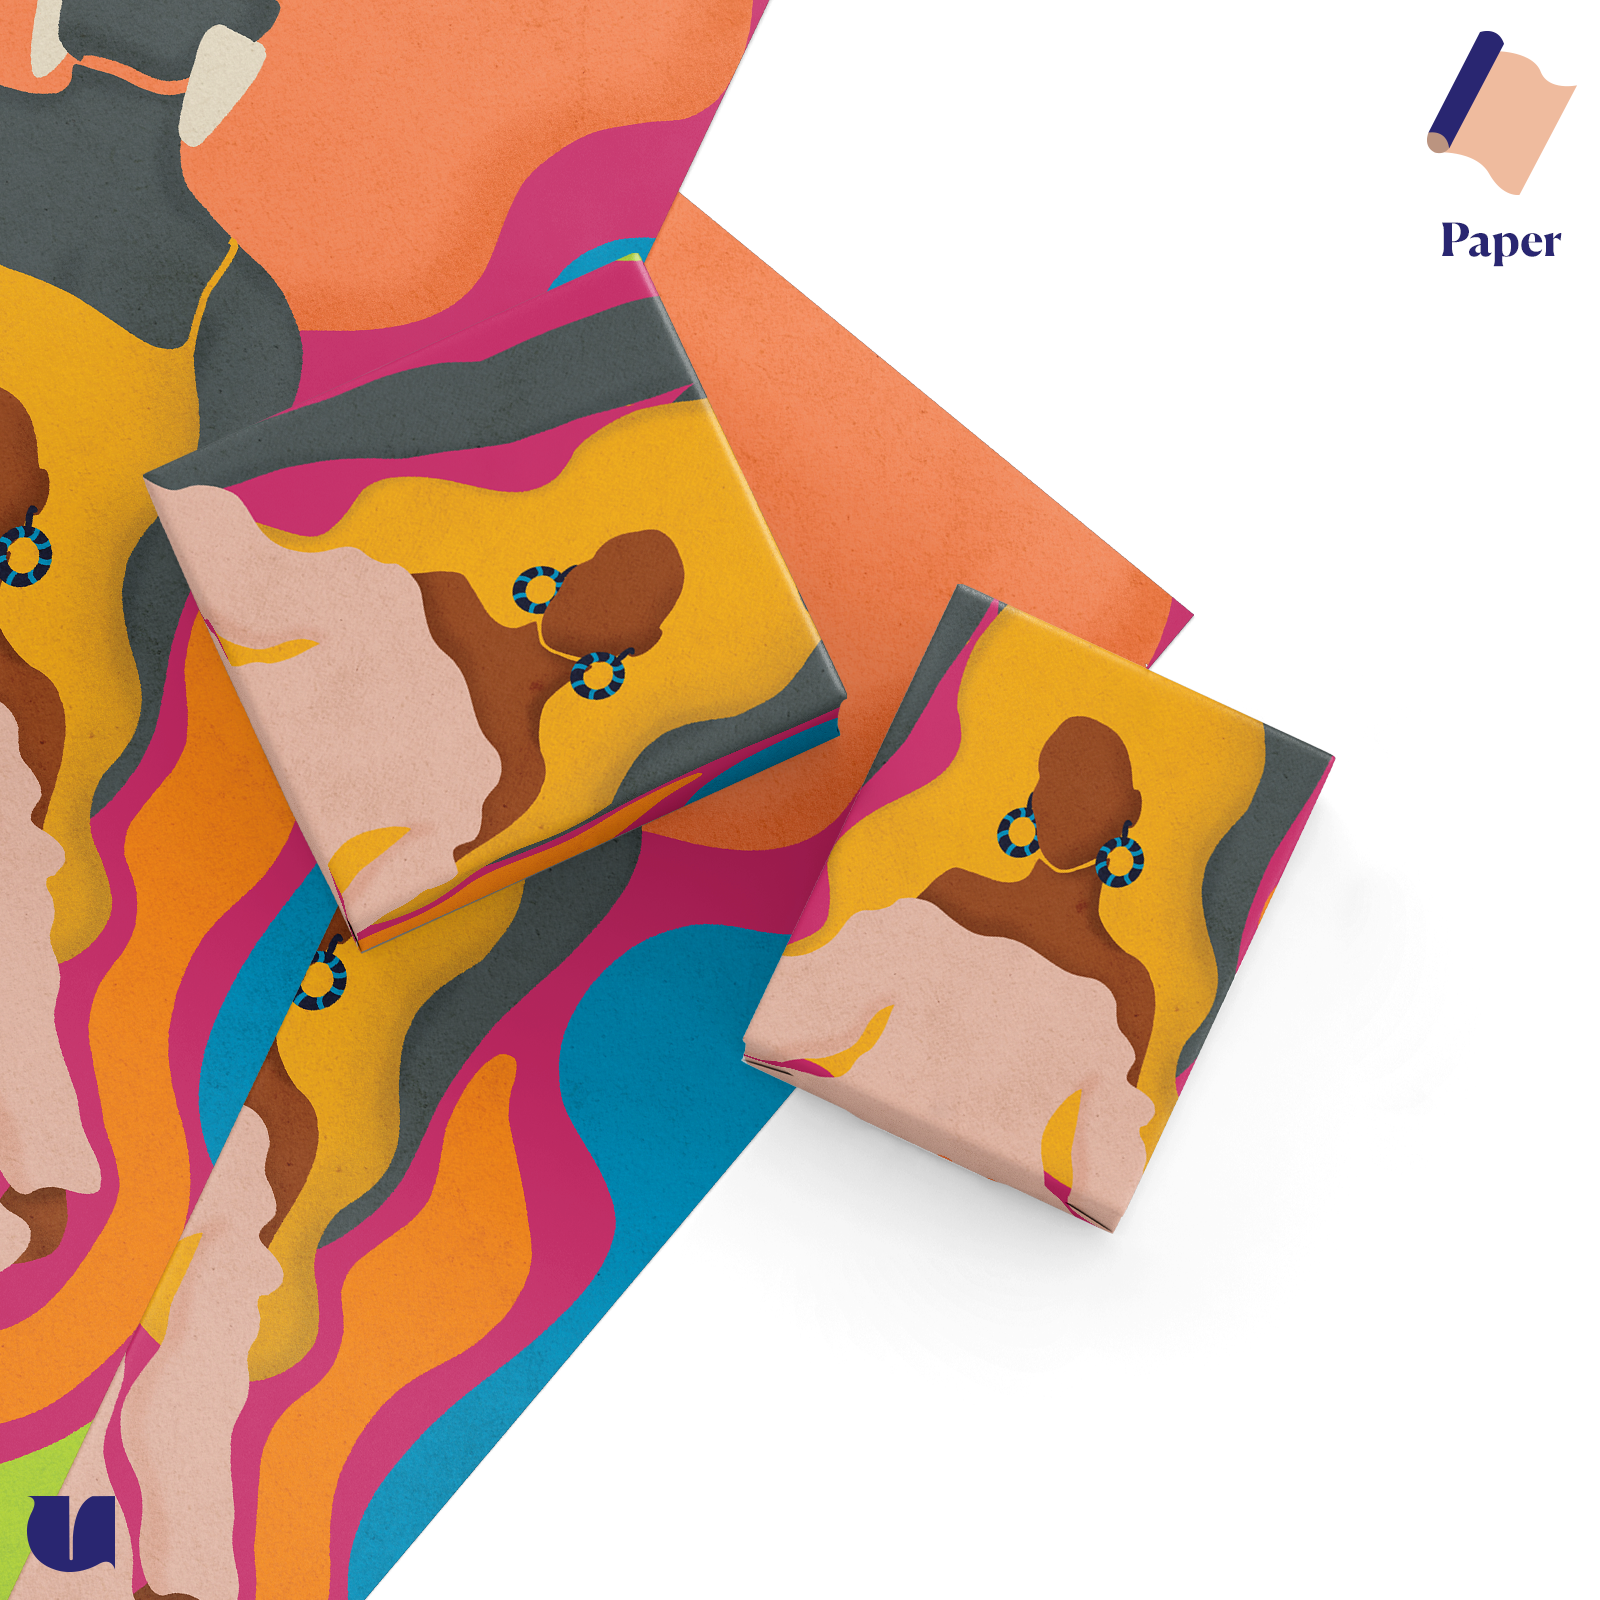 wrapping paper printed with blonde haired black woman